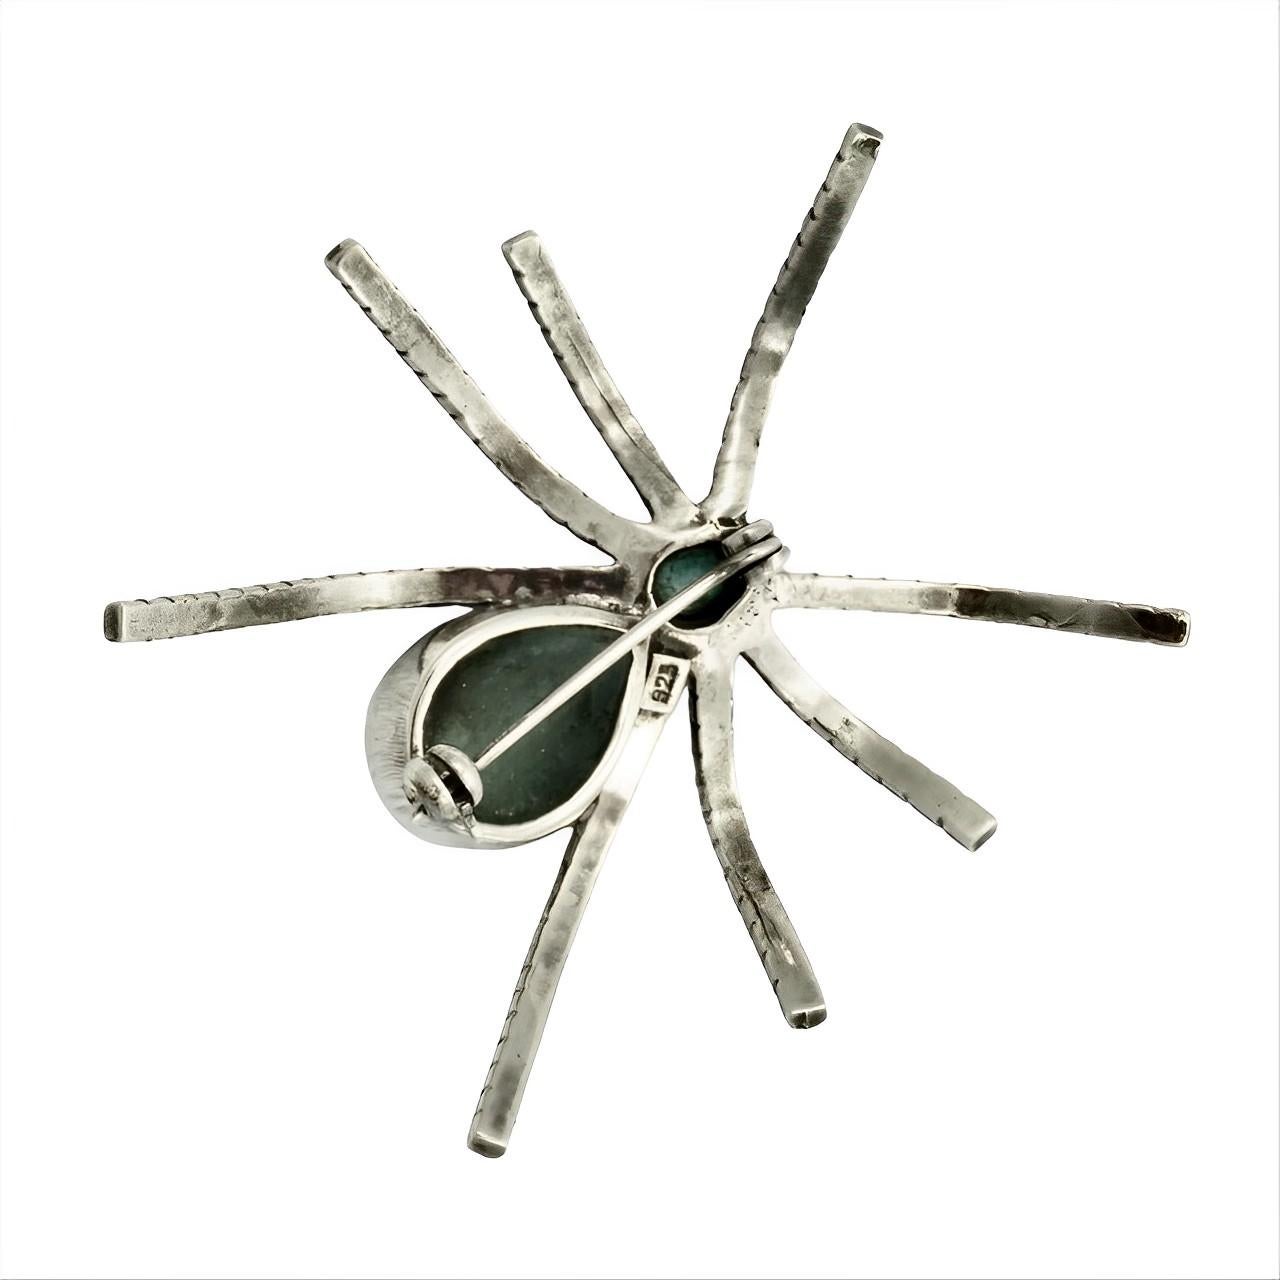 Fabulous sterling silver spider brooch, set with teardrop shaped turquoise stones for the body and head, and the legs are set with marcasites. Measuring diameter approximately 5.3 cm / 2 inches.

This is an unusual and beautiful spider statement